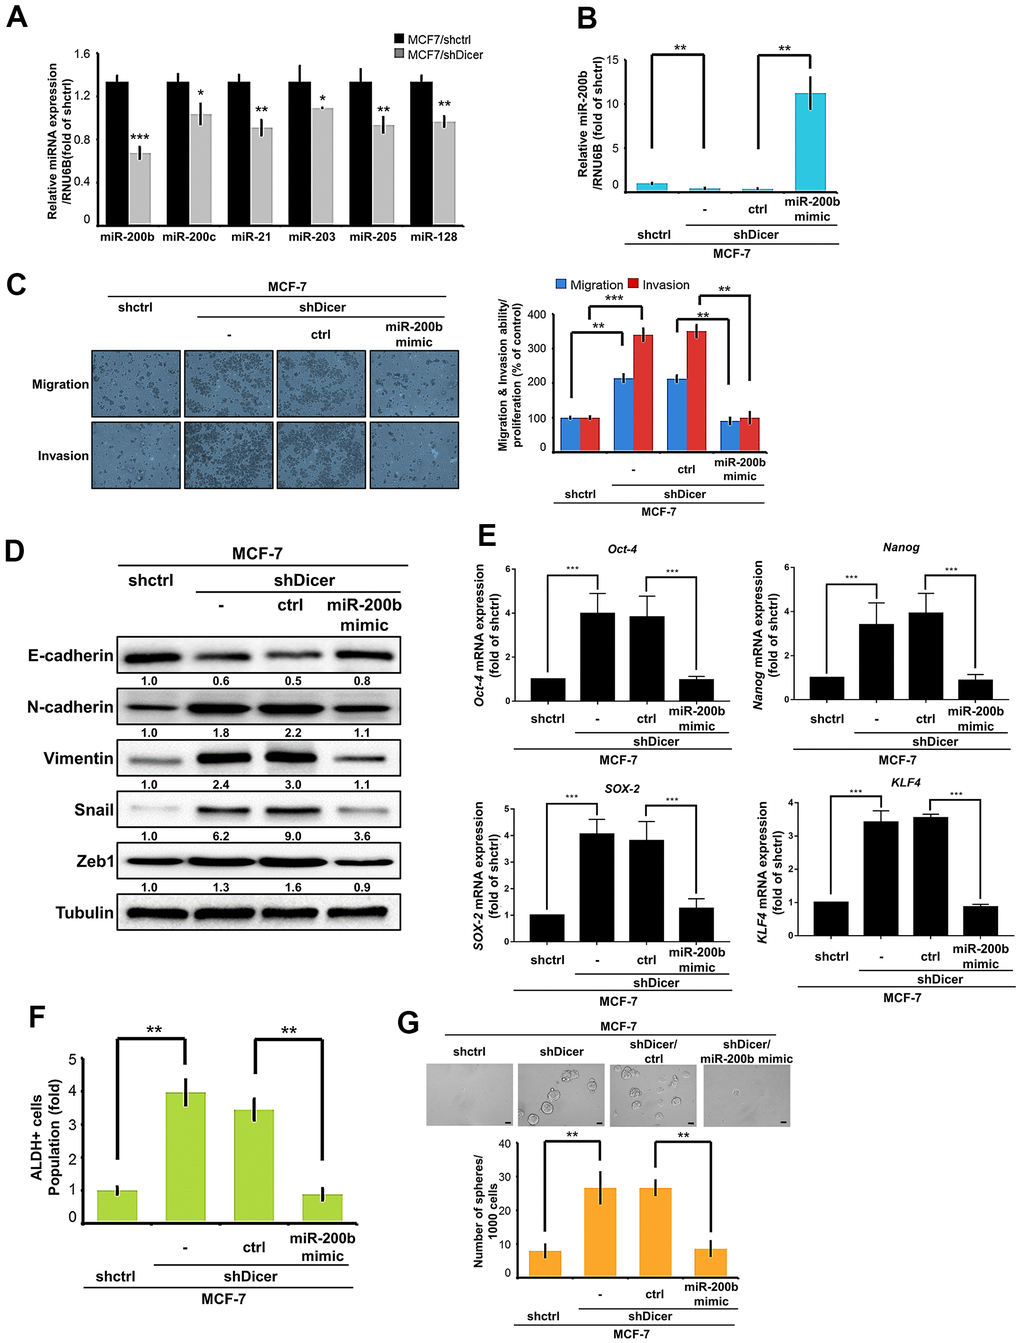 miR-200b is involved in Dicer-mediated cell migration/invasion, and CSCs properties of breast cancer cells. (A) Analysis of miR-200b, miR-200c, miR-21, miR-203, miR-205, and miR-128 in MCF-7/shDicer cells compared with MCF-7 cells through quantitative real-time polymerase chain reaction (qRT-PCR). (B) qRT-PCR analysis was performed to detect miR-200b levels in the MCF-7/shDicer cells transfected with a miR-200b mimic. (C) The migration and invasion of the indicated cells were examined using the cell migration and invasion assays, respectively. (D) The protein expression levels of E-cadherin, N-cadherin, Vimentin, Snail, and Zeb1 were analyzed through Western blot. (E) The expression levels of Oct-4, Nanog, SOX-2, and KLF4 mRNA were analyzed through qRT-PCR. (F) Analysis of ALDH activity to determine the subpopulation of CSCs properties of the present cells. (G) Sphere formation was examined to measure the self-renewal ability of MCF-7 cells with Dicer knockdown and miR-200b overexpression. Data are presented as the mean ± standard error mean of three independent experiments. *P 